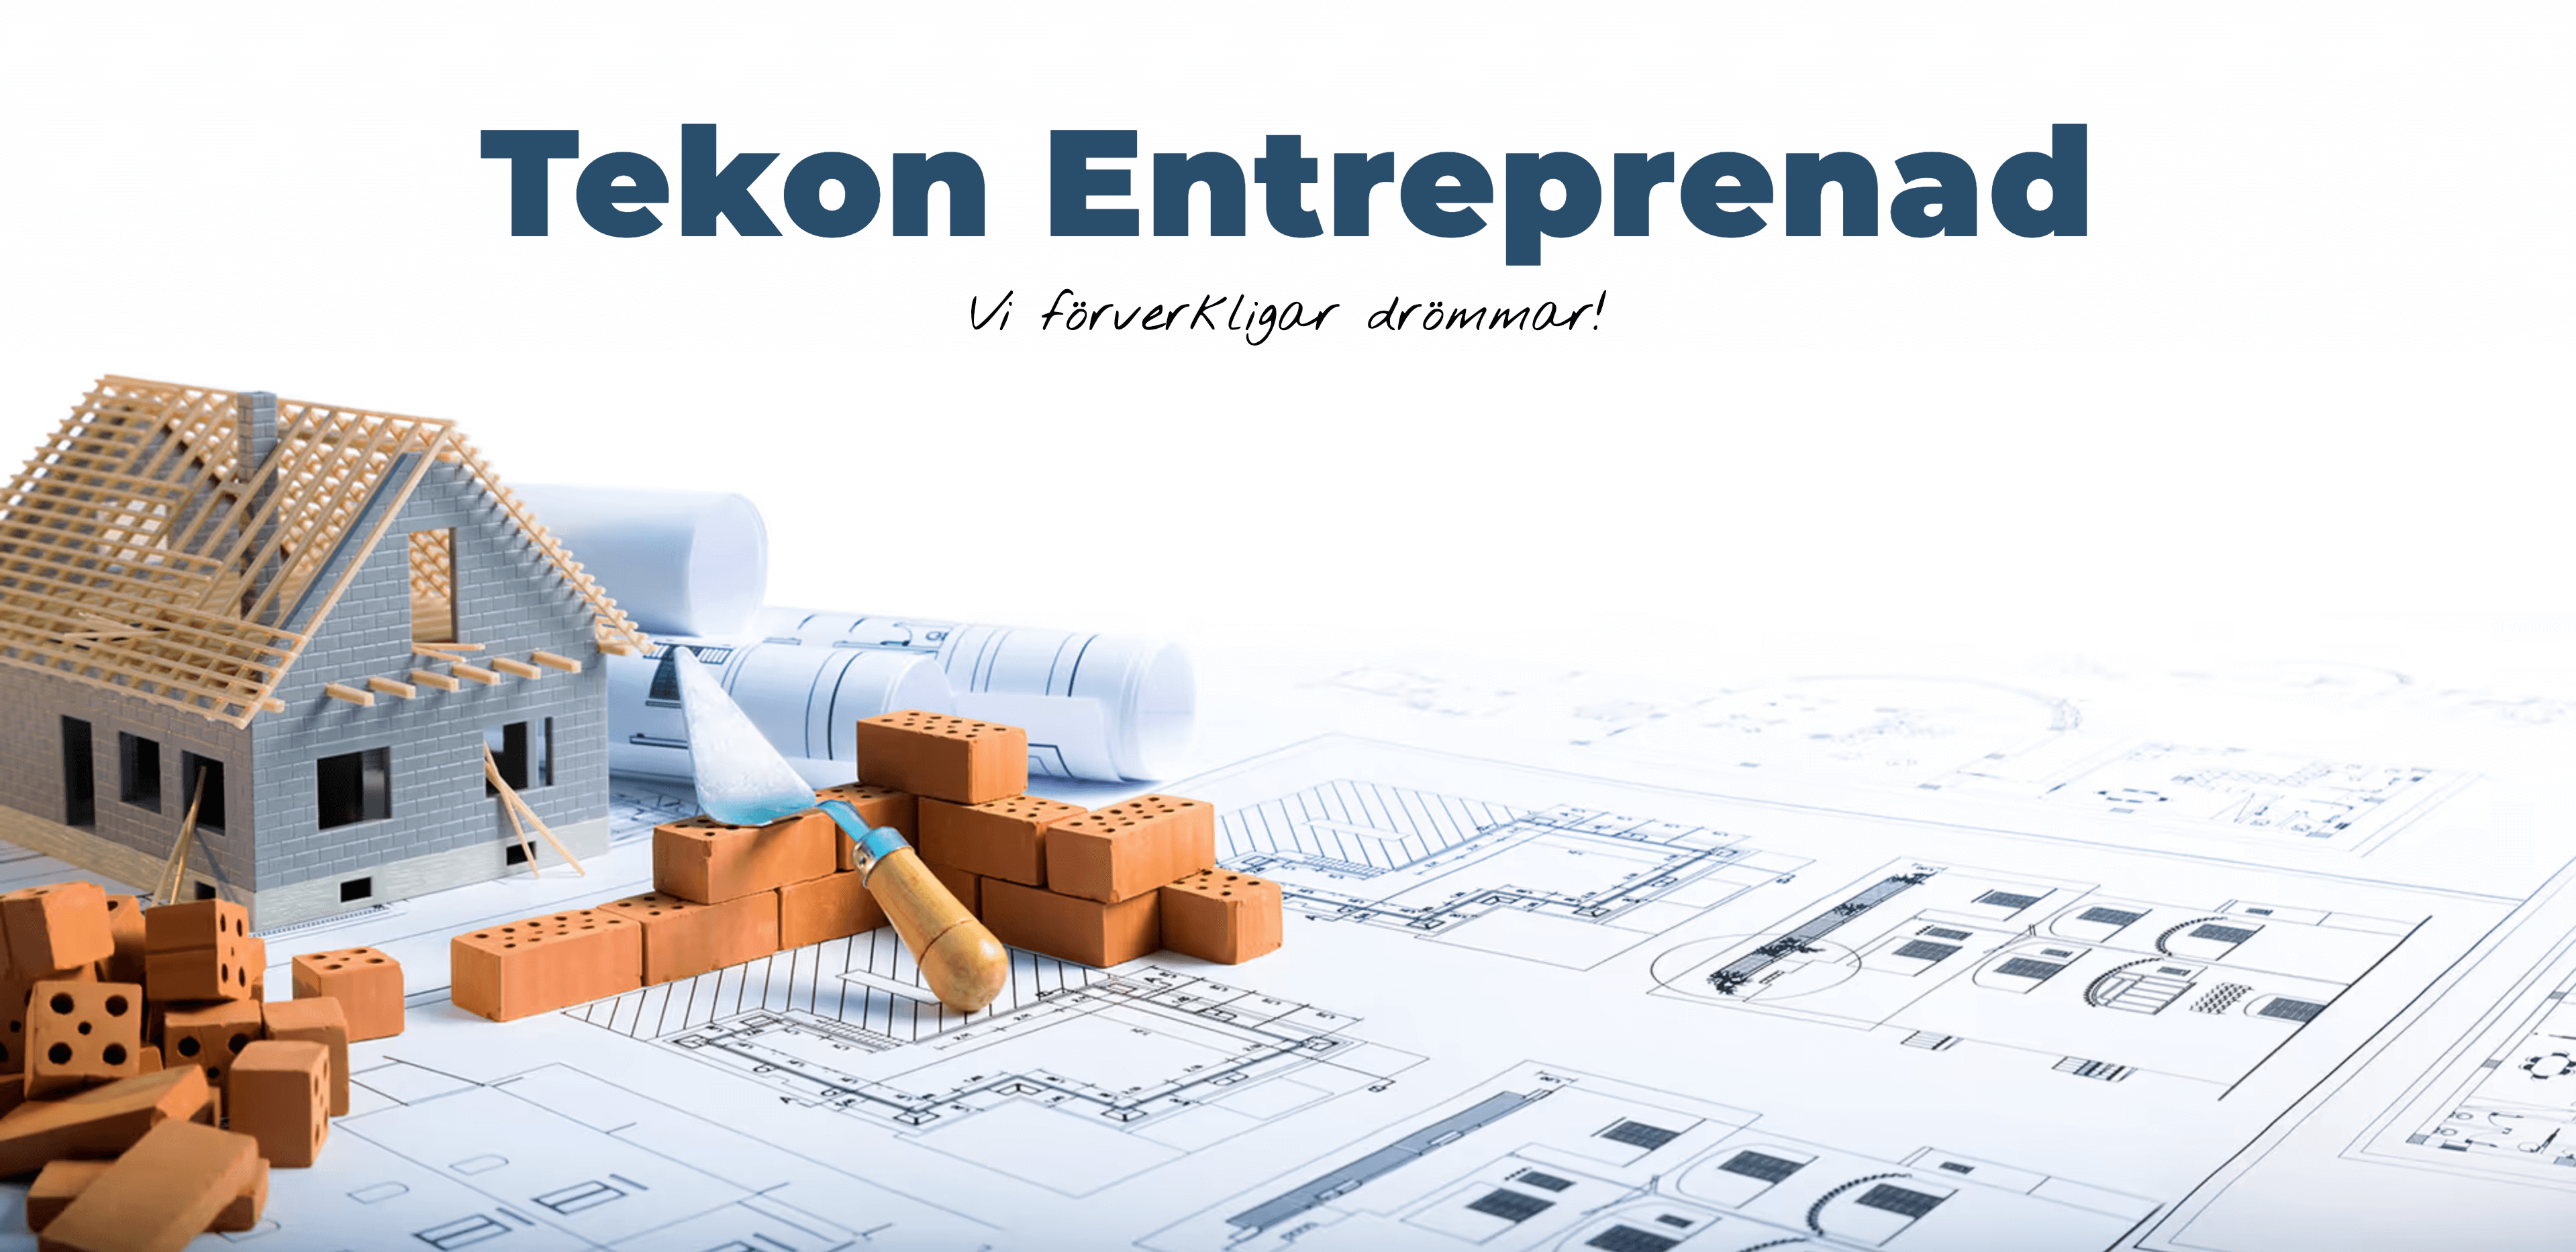 Screenshot of the landing page of the company website for Tekon Entreprenad.